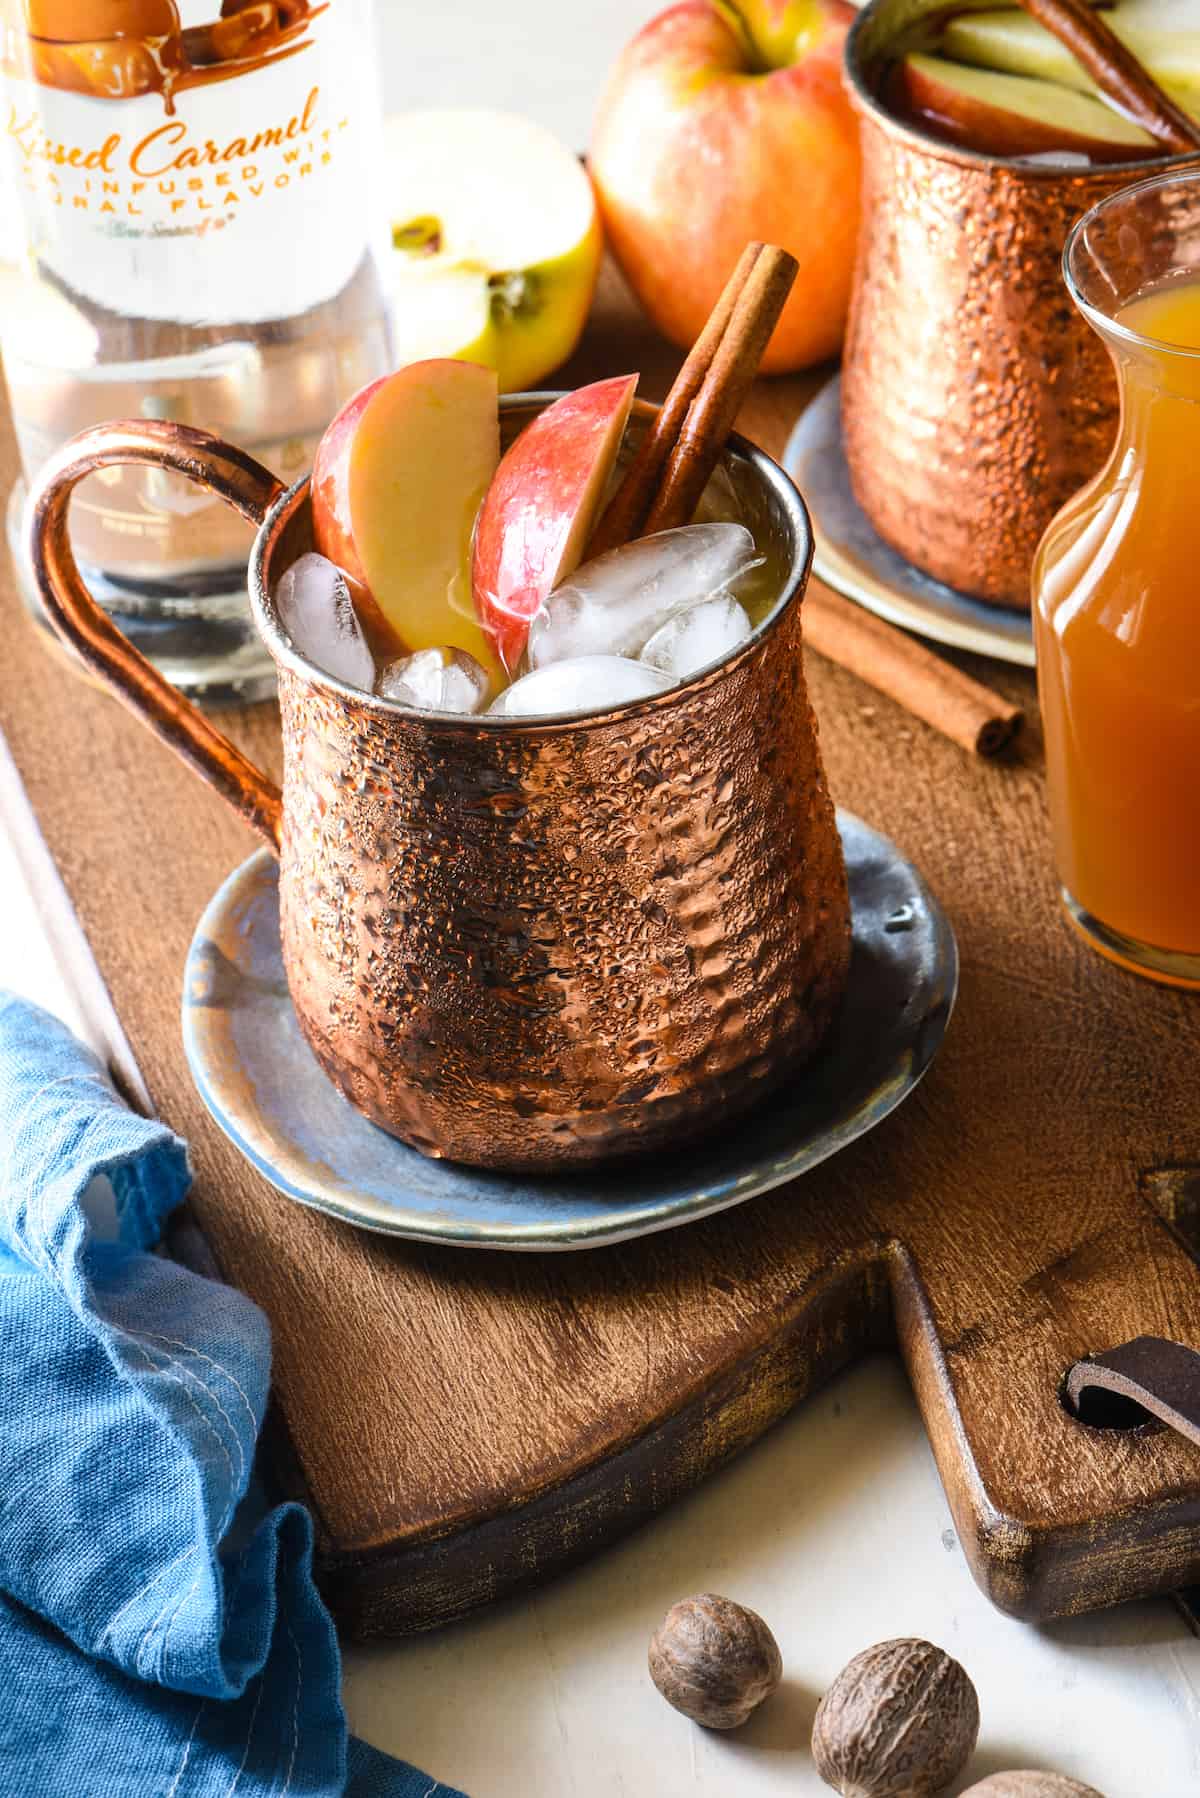 Copper Moscow mule mug filled with apple cider and vodka, garnished with fresh apple slices and cinnamon sticks.